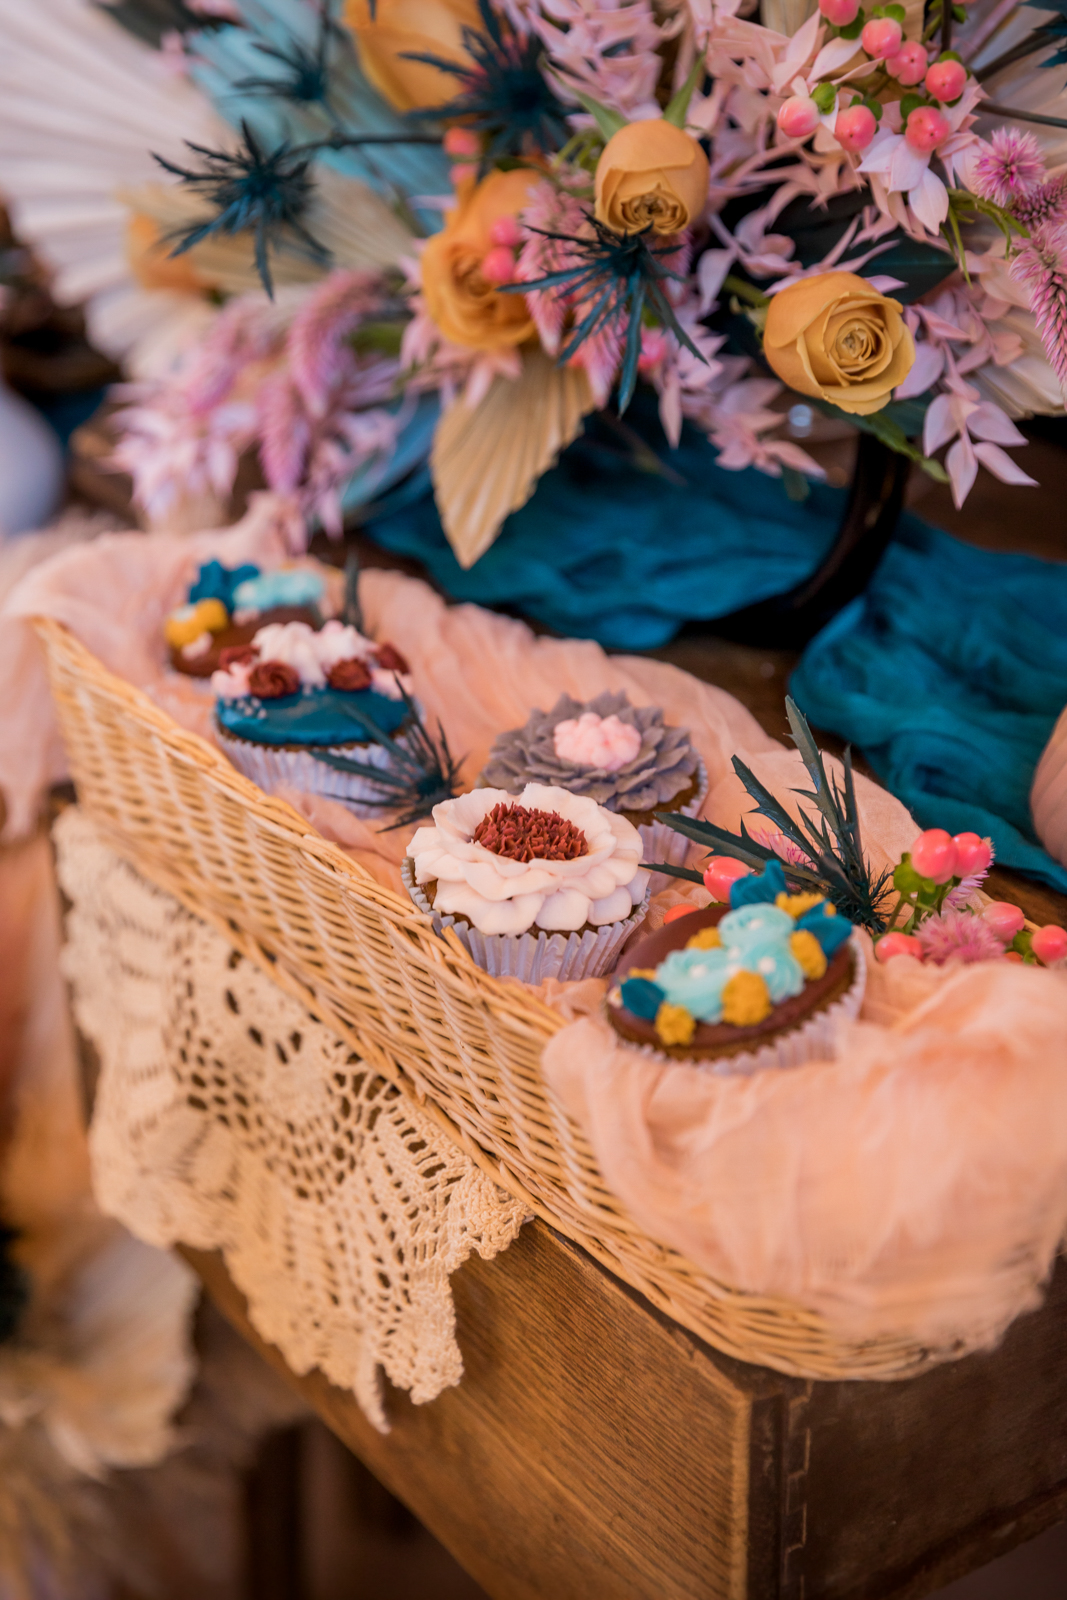 Coordinating colorful Floral Wedding Cupcakes